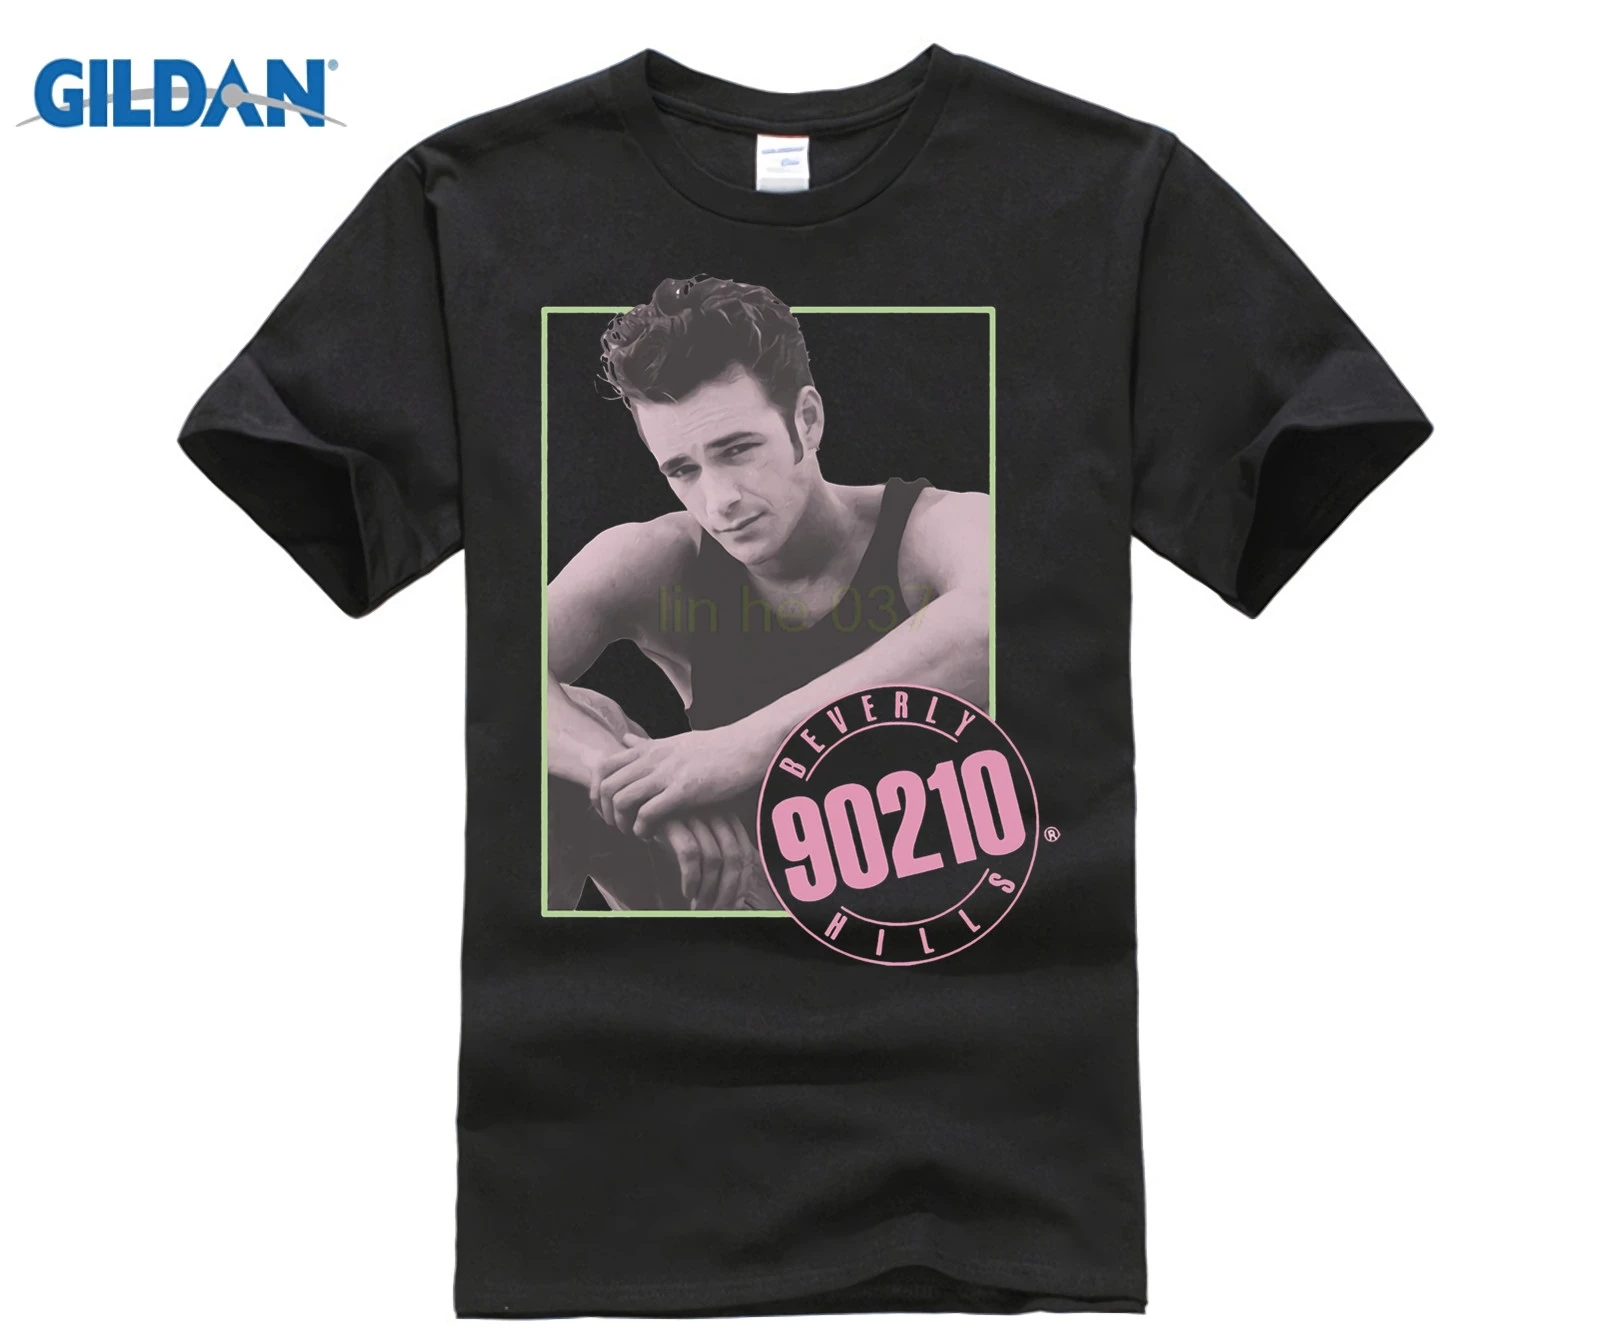 

Gildan Beverly Hills 90210 Tv Show Dylan Mckay Luke Perry Picture Adult Men'S Crew Neck Short-Sleeve Printing Machine T Shirts